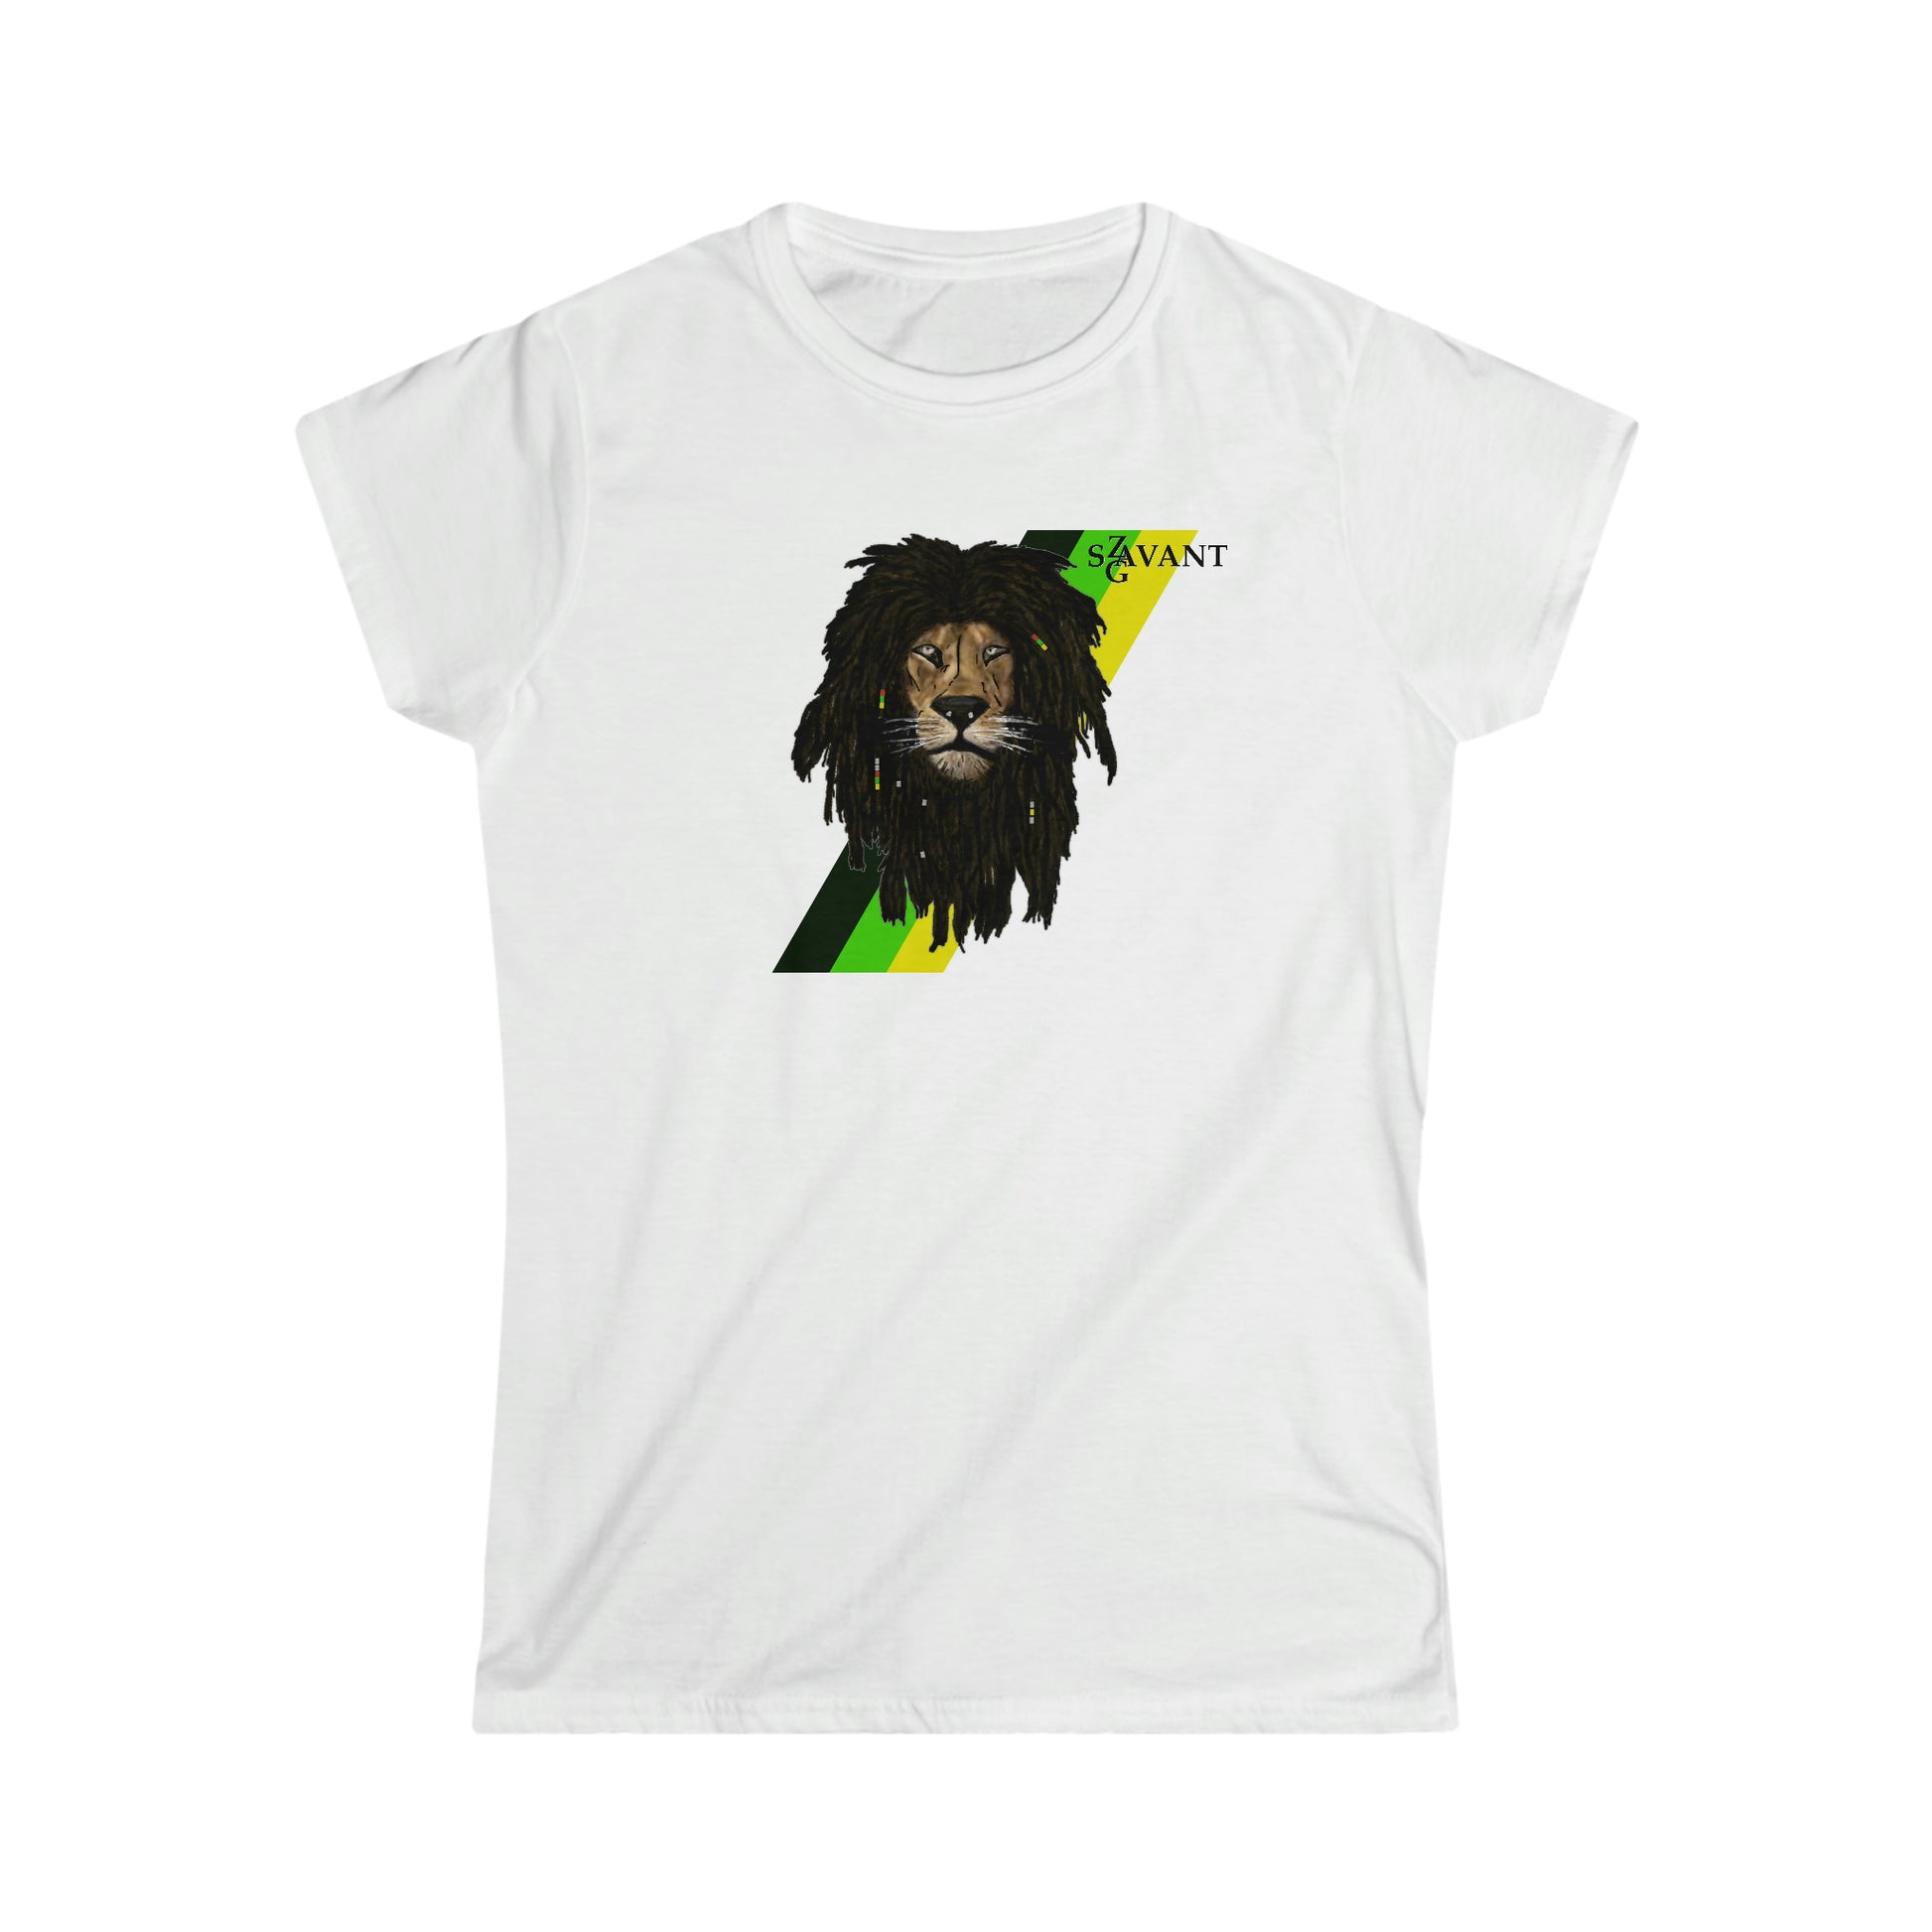 Women's Softstyle T-Shirt - With Jamaican Colors